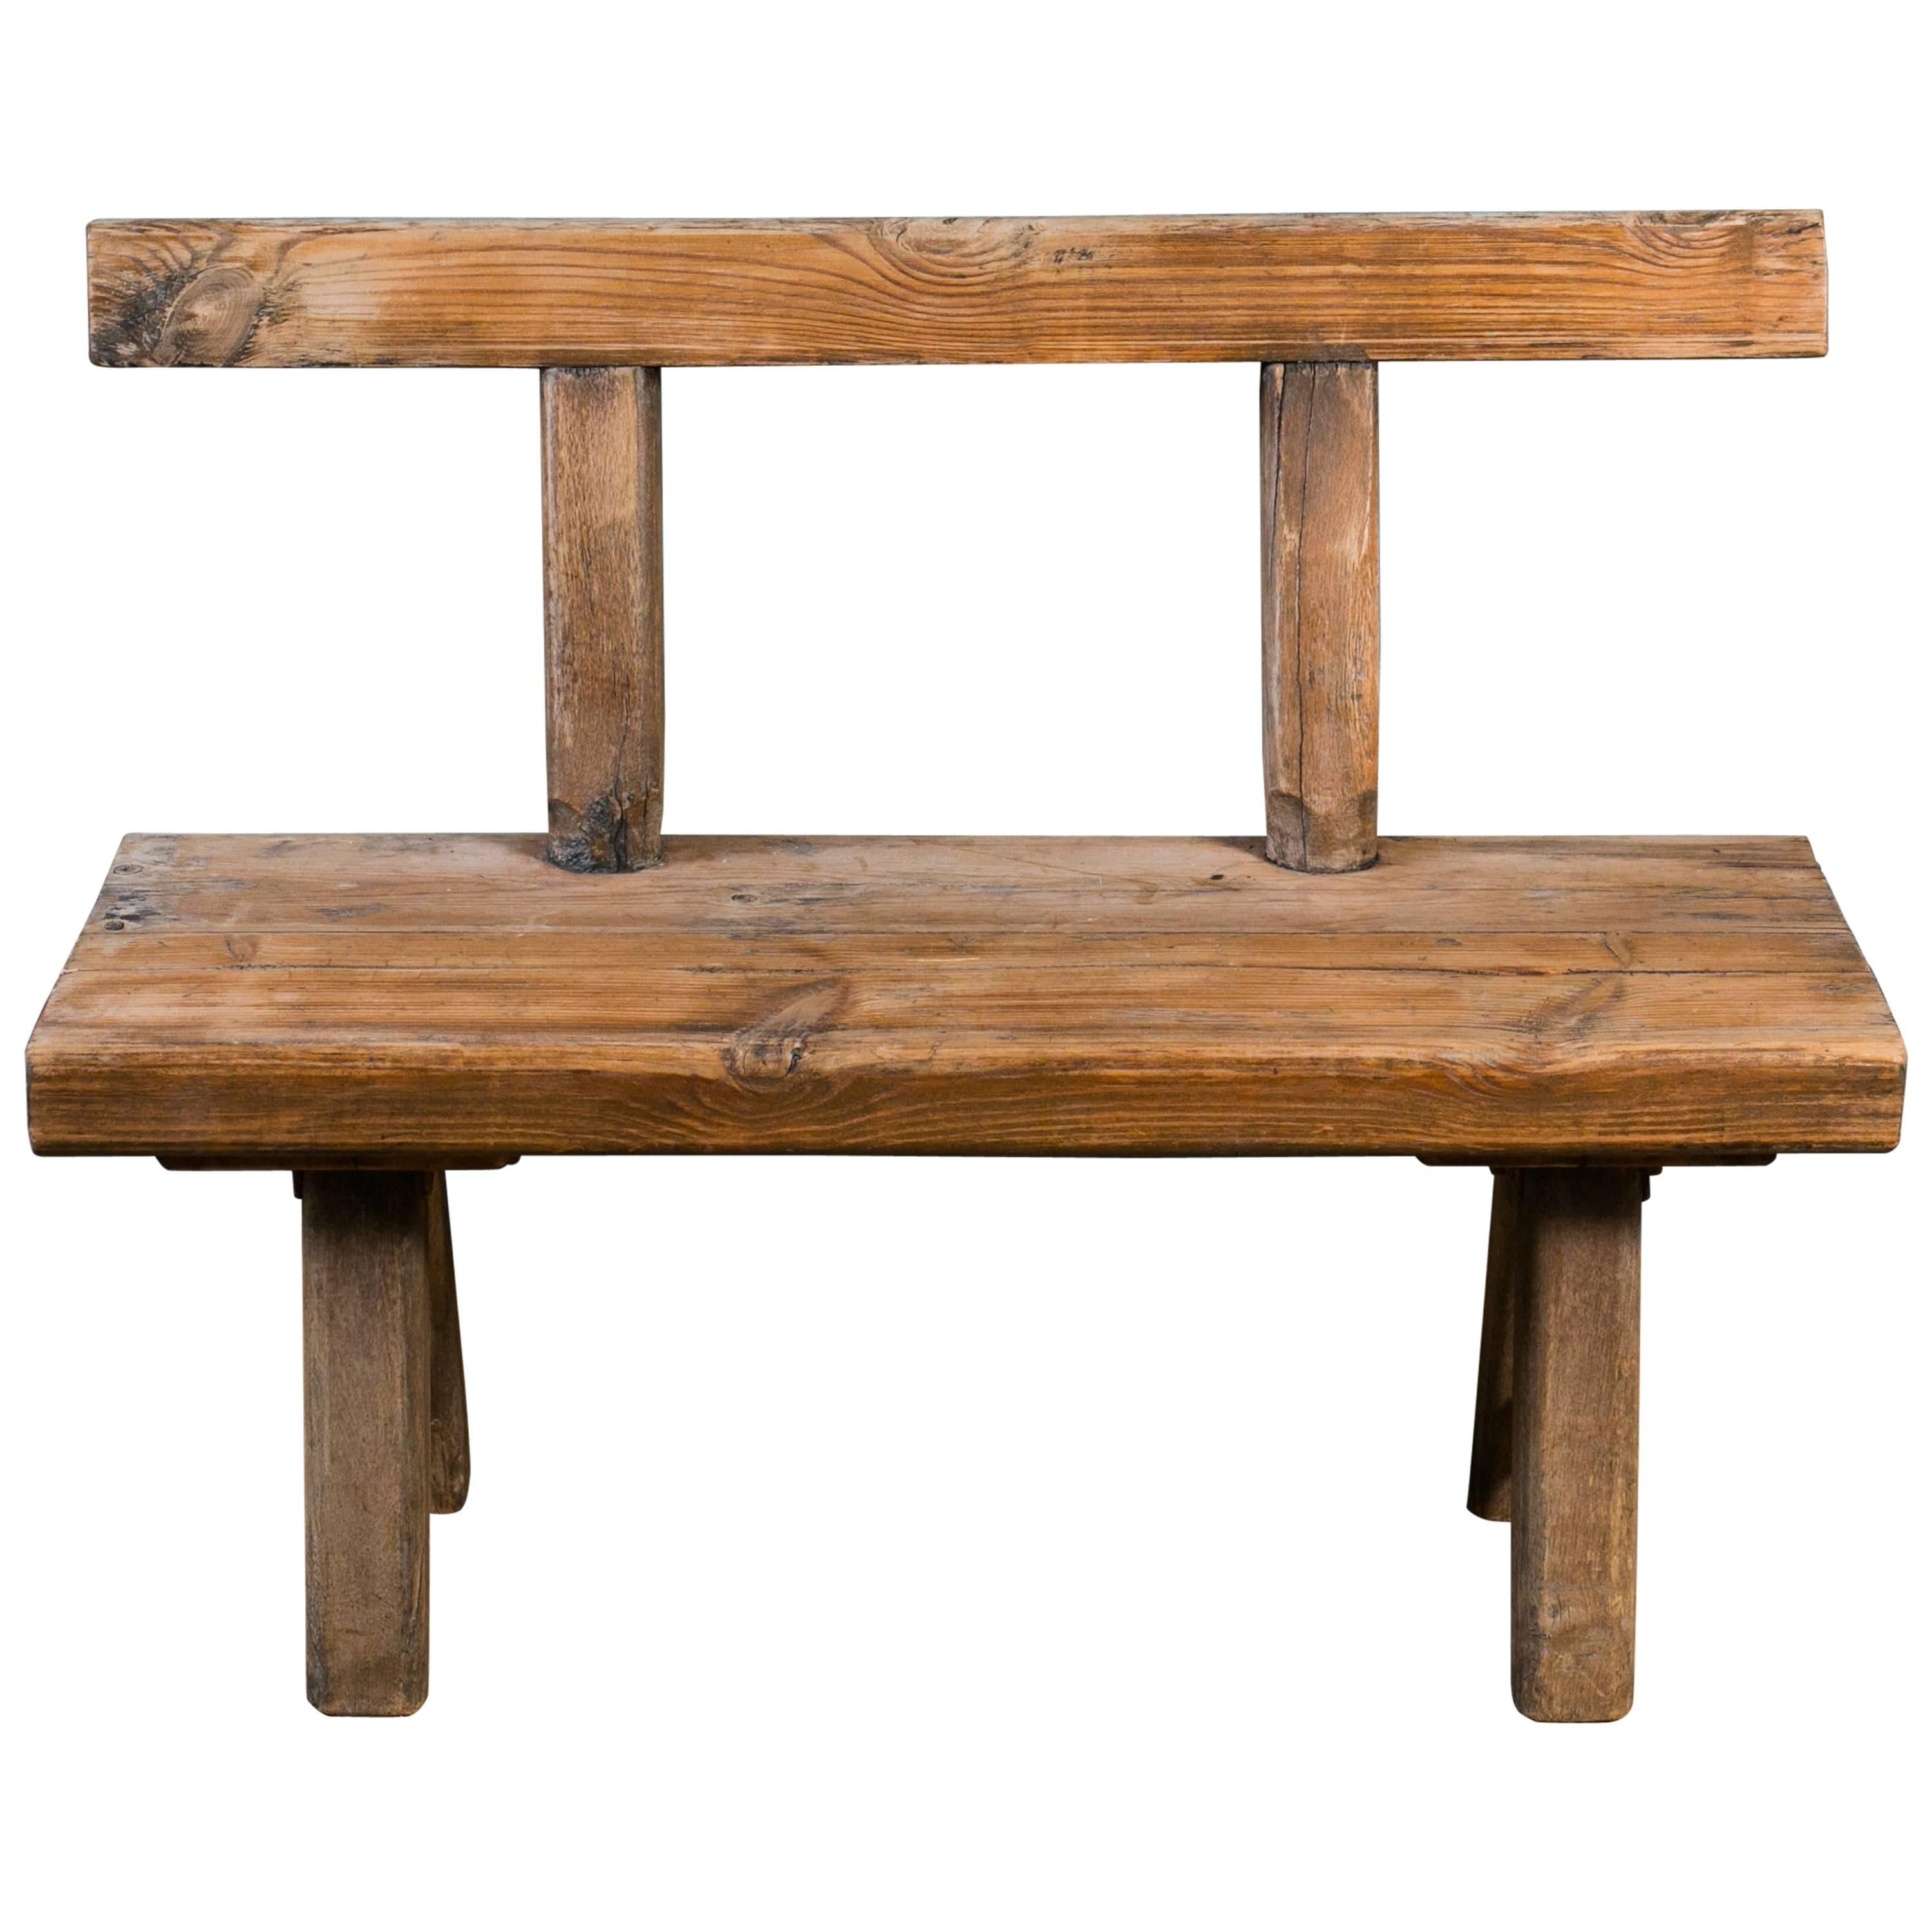 Rustic and Primitive Oak Bench with Back from Belgium circa 1920